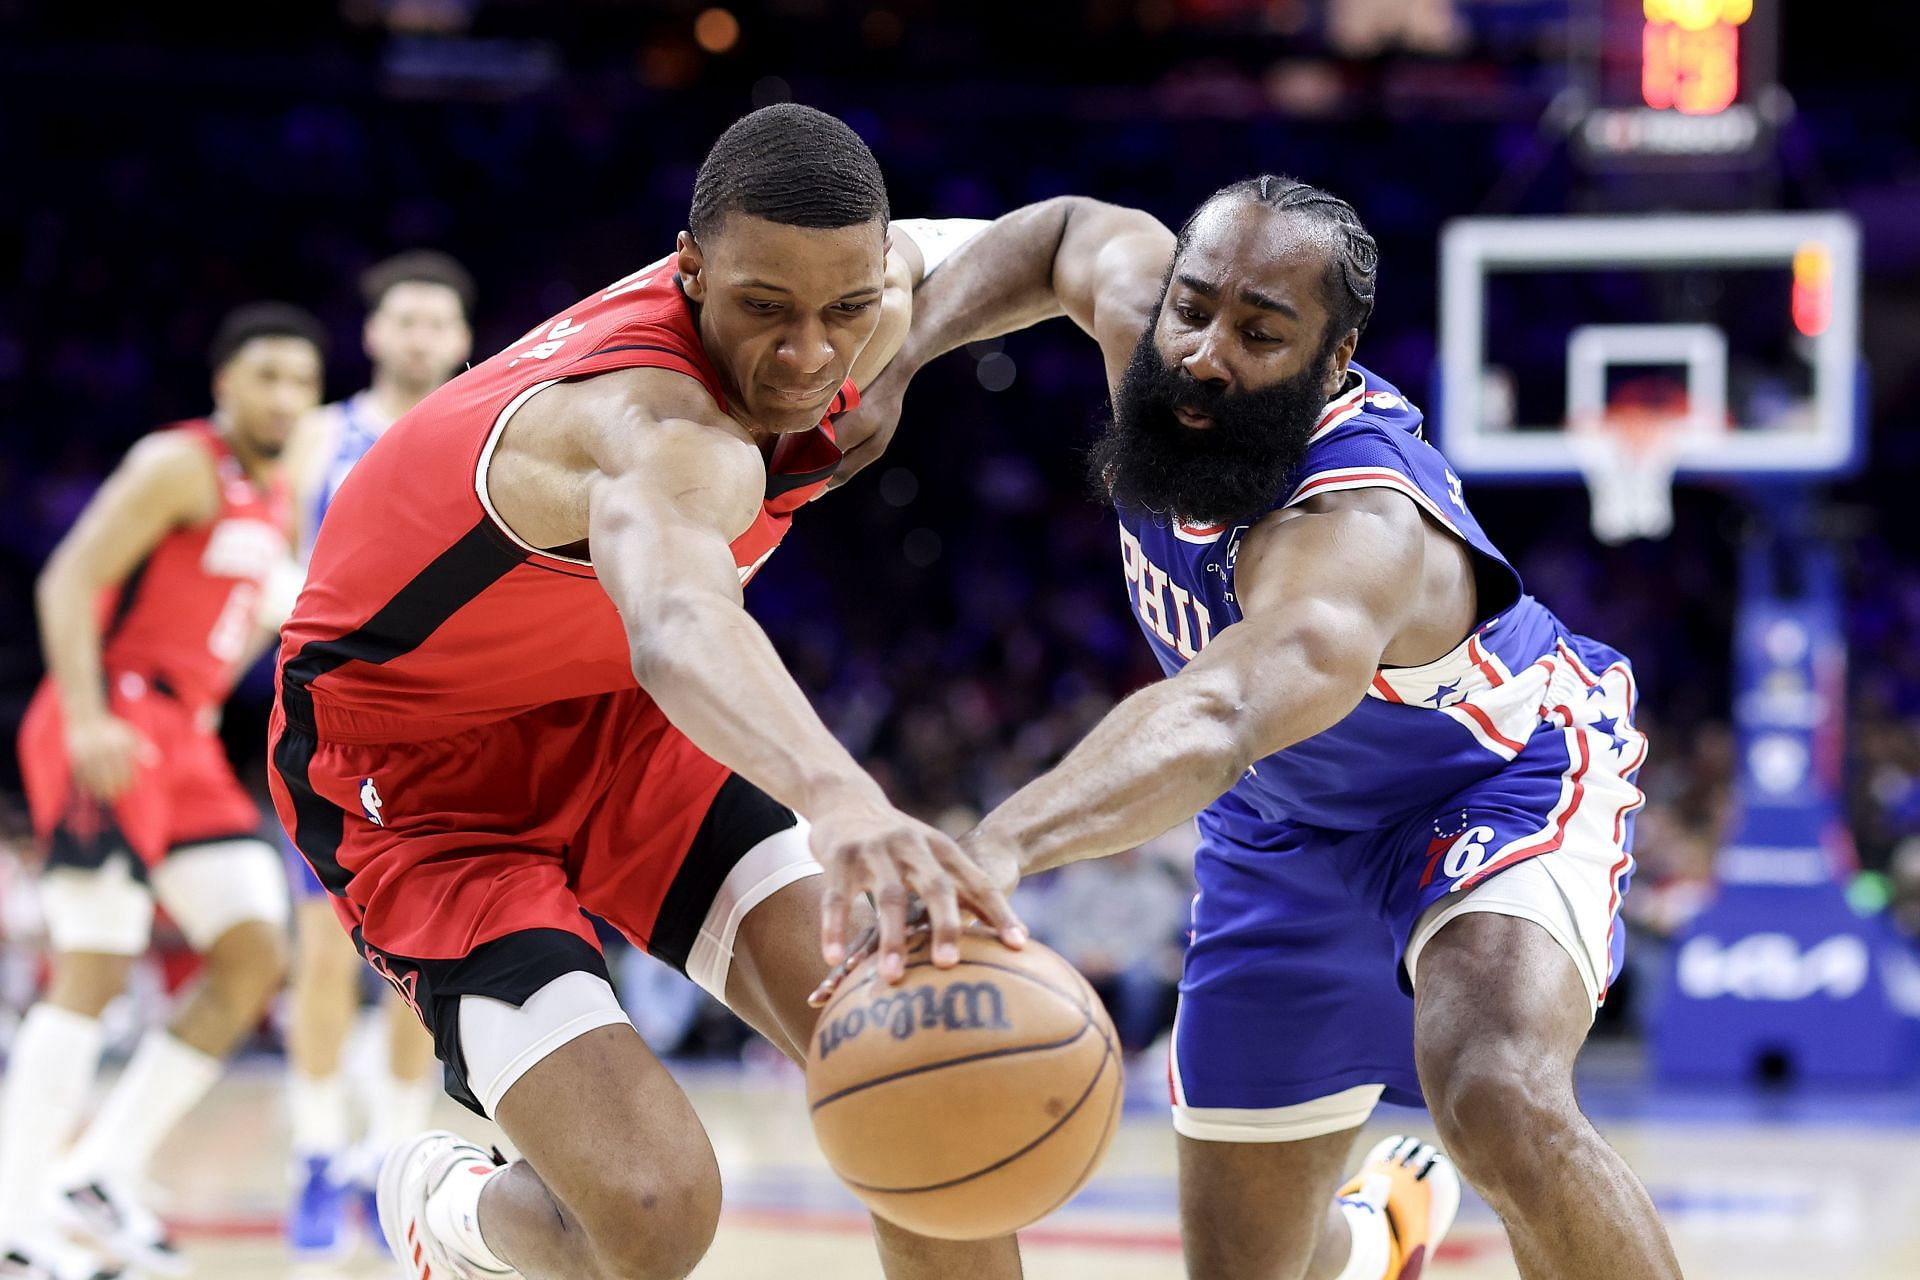 NBA playoffs 2022 - James Harden's performance reveals the uncertain future  for the Philadelphia 76ers' star duo - ESPN